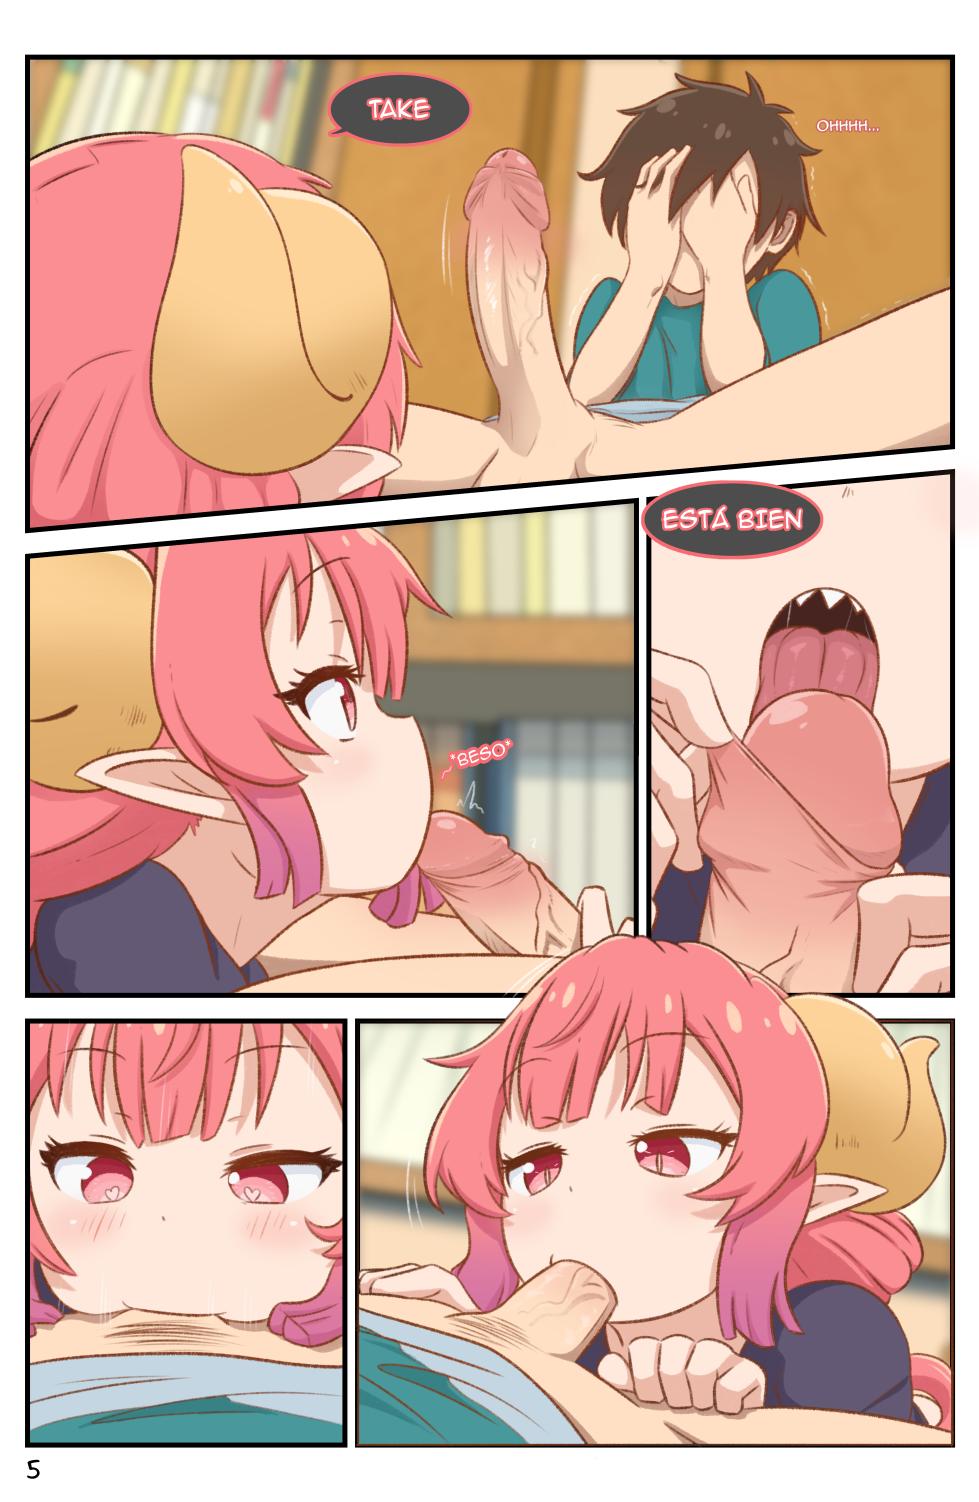 [GreatM8] Defiition | Definición (Miss Kobayashi's Dragon Maid S) (Spanish) (Ongoing) - Page 6